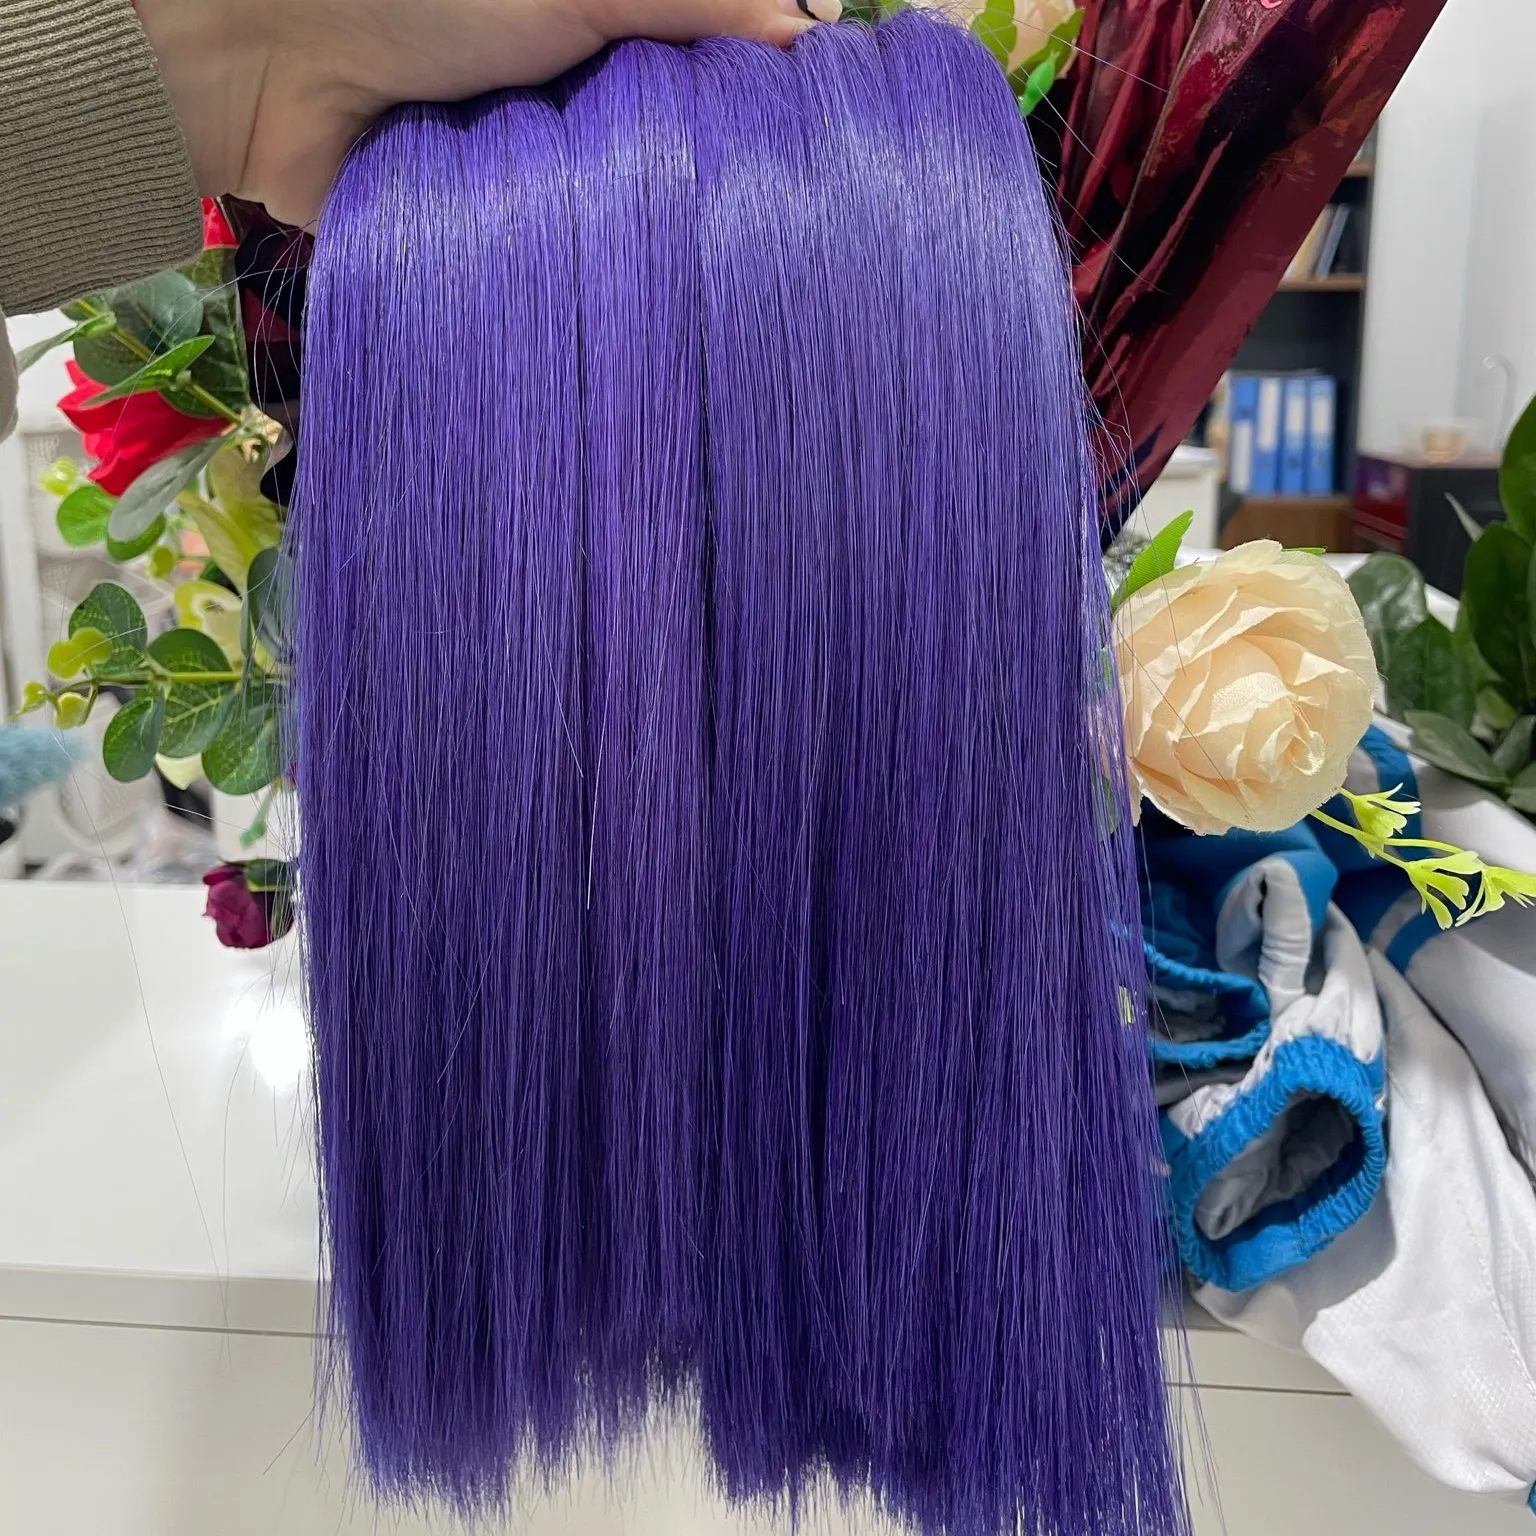 Reasonable Price Best Choice Color for New Year 2023 Purple Color Hair Weaving Bundles Human Hair Extension